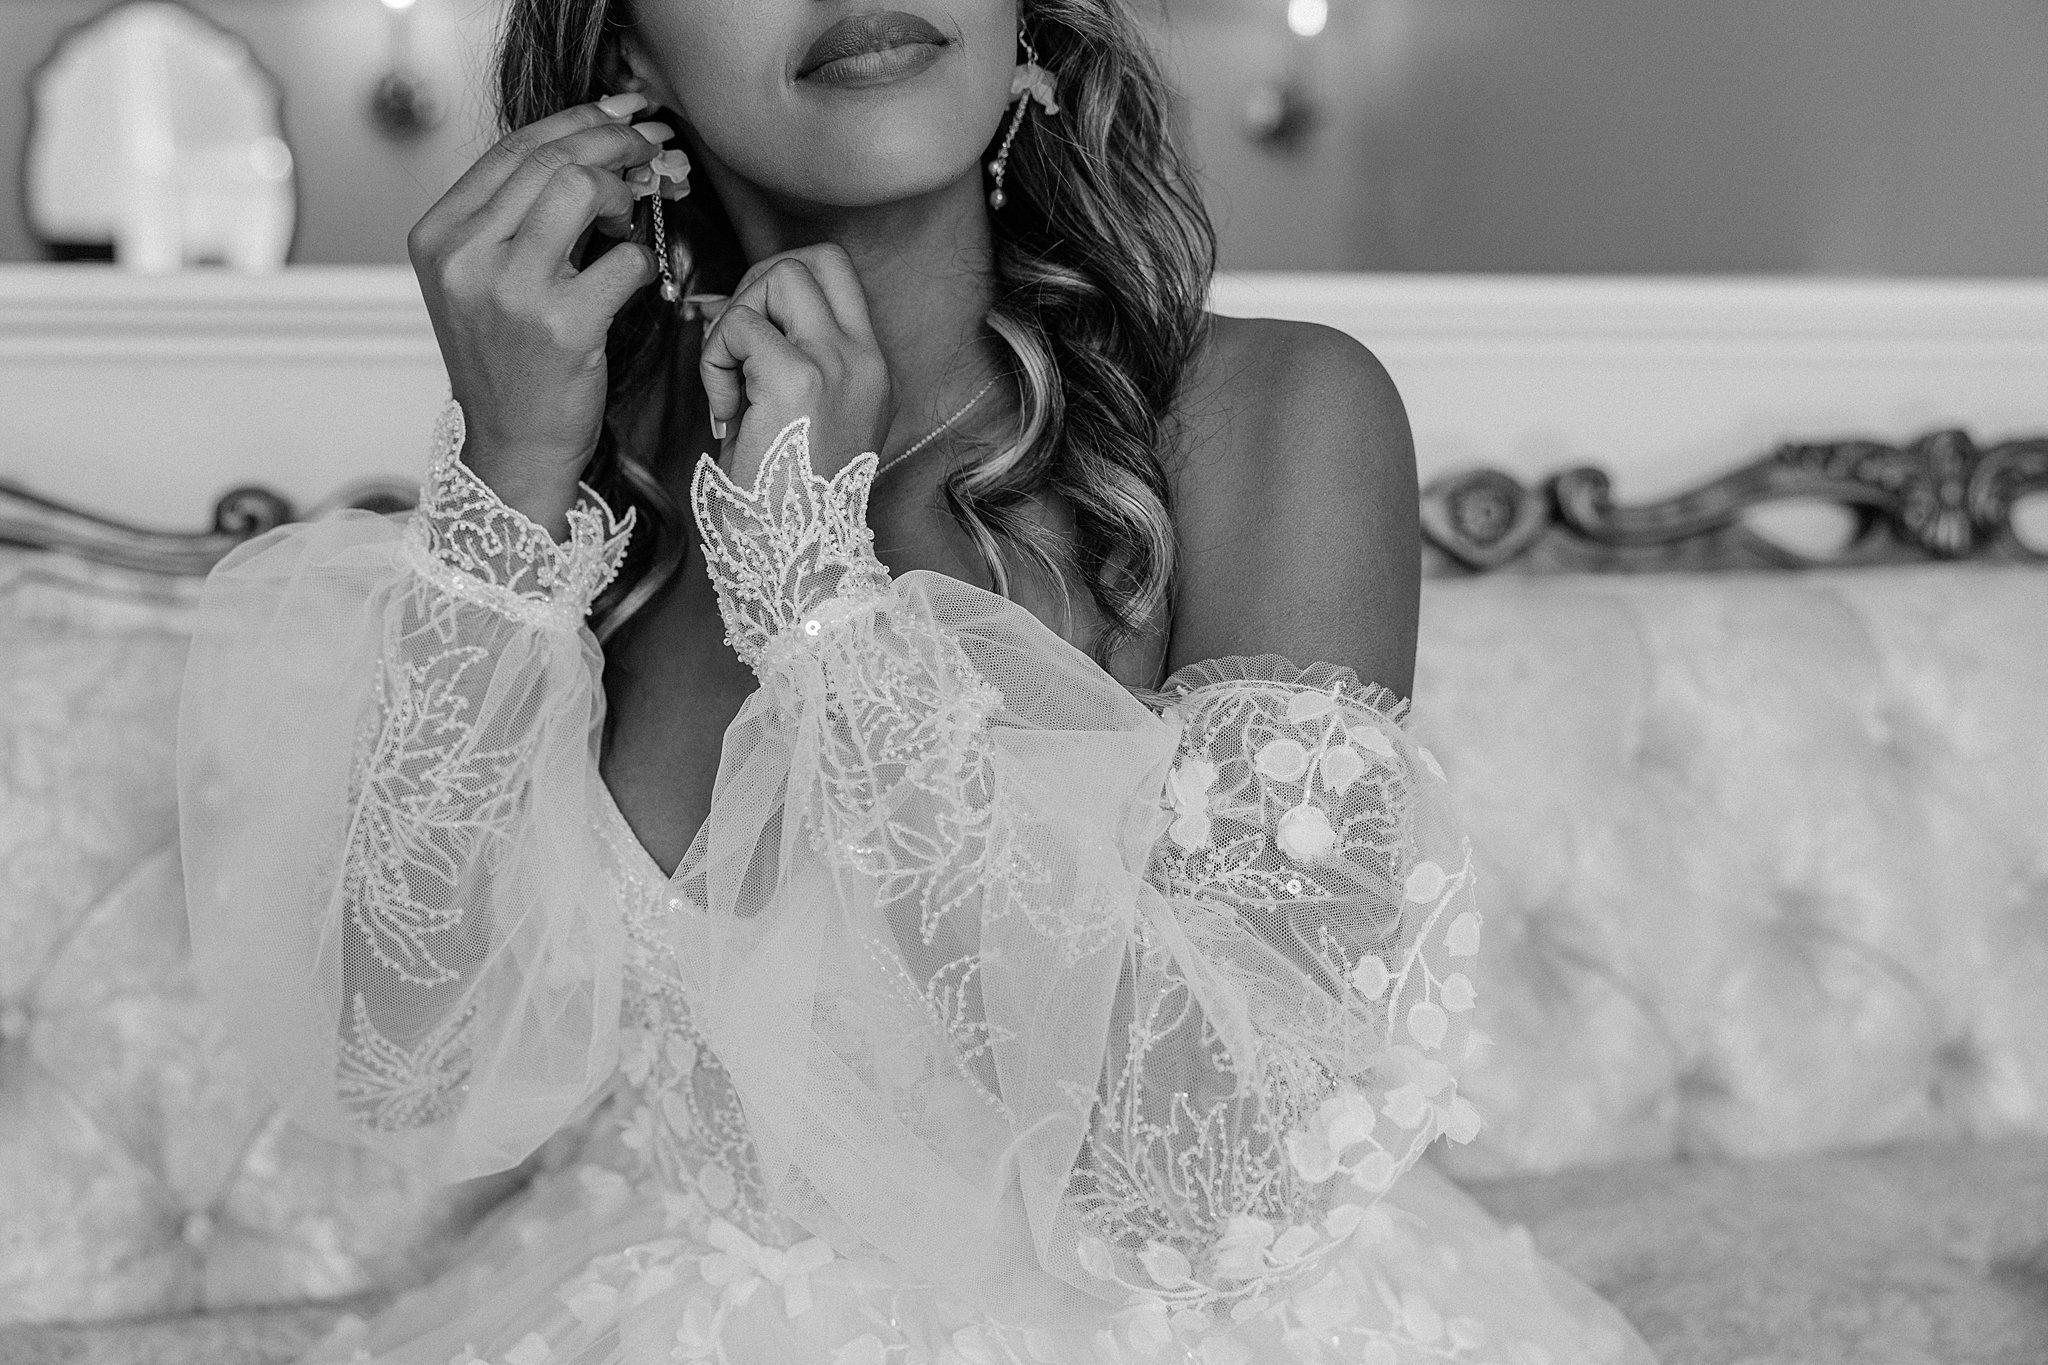 Details of a bride in a lace dress putting on her earrings on an antique couch